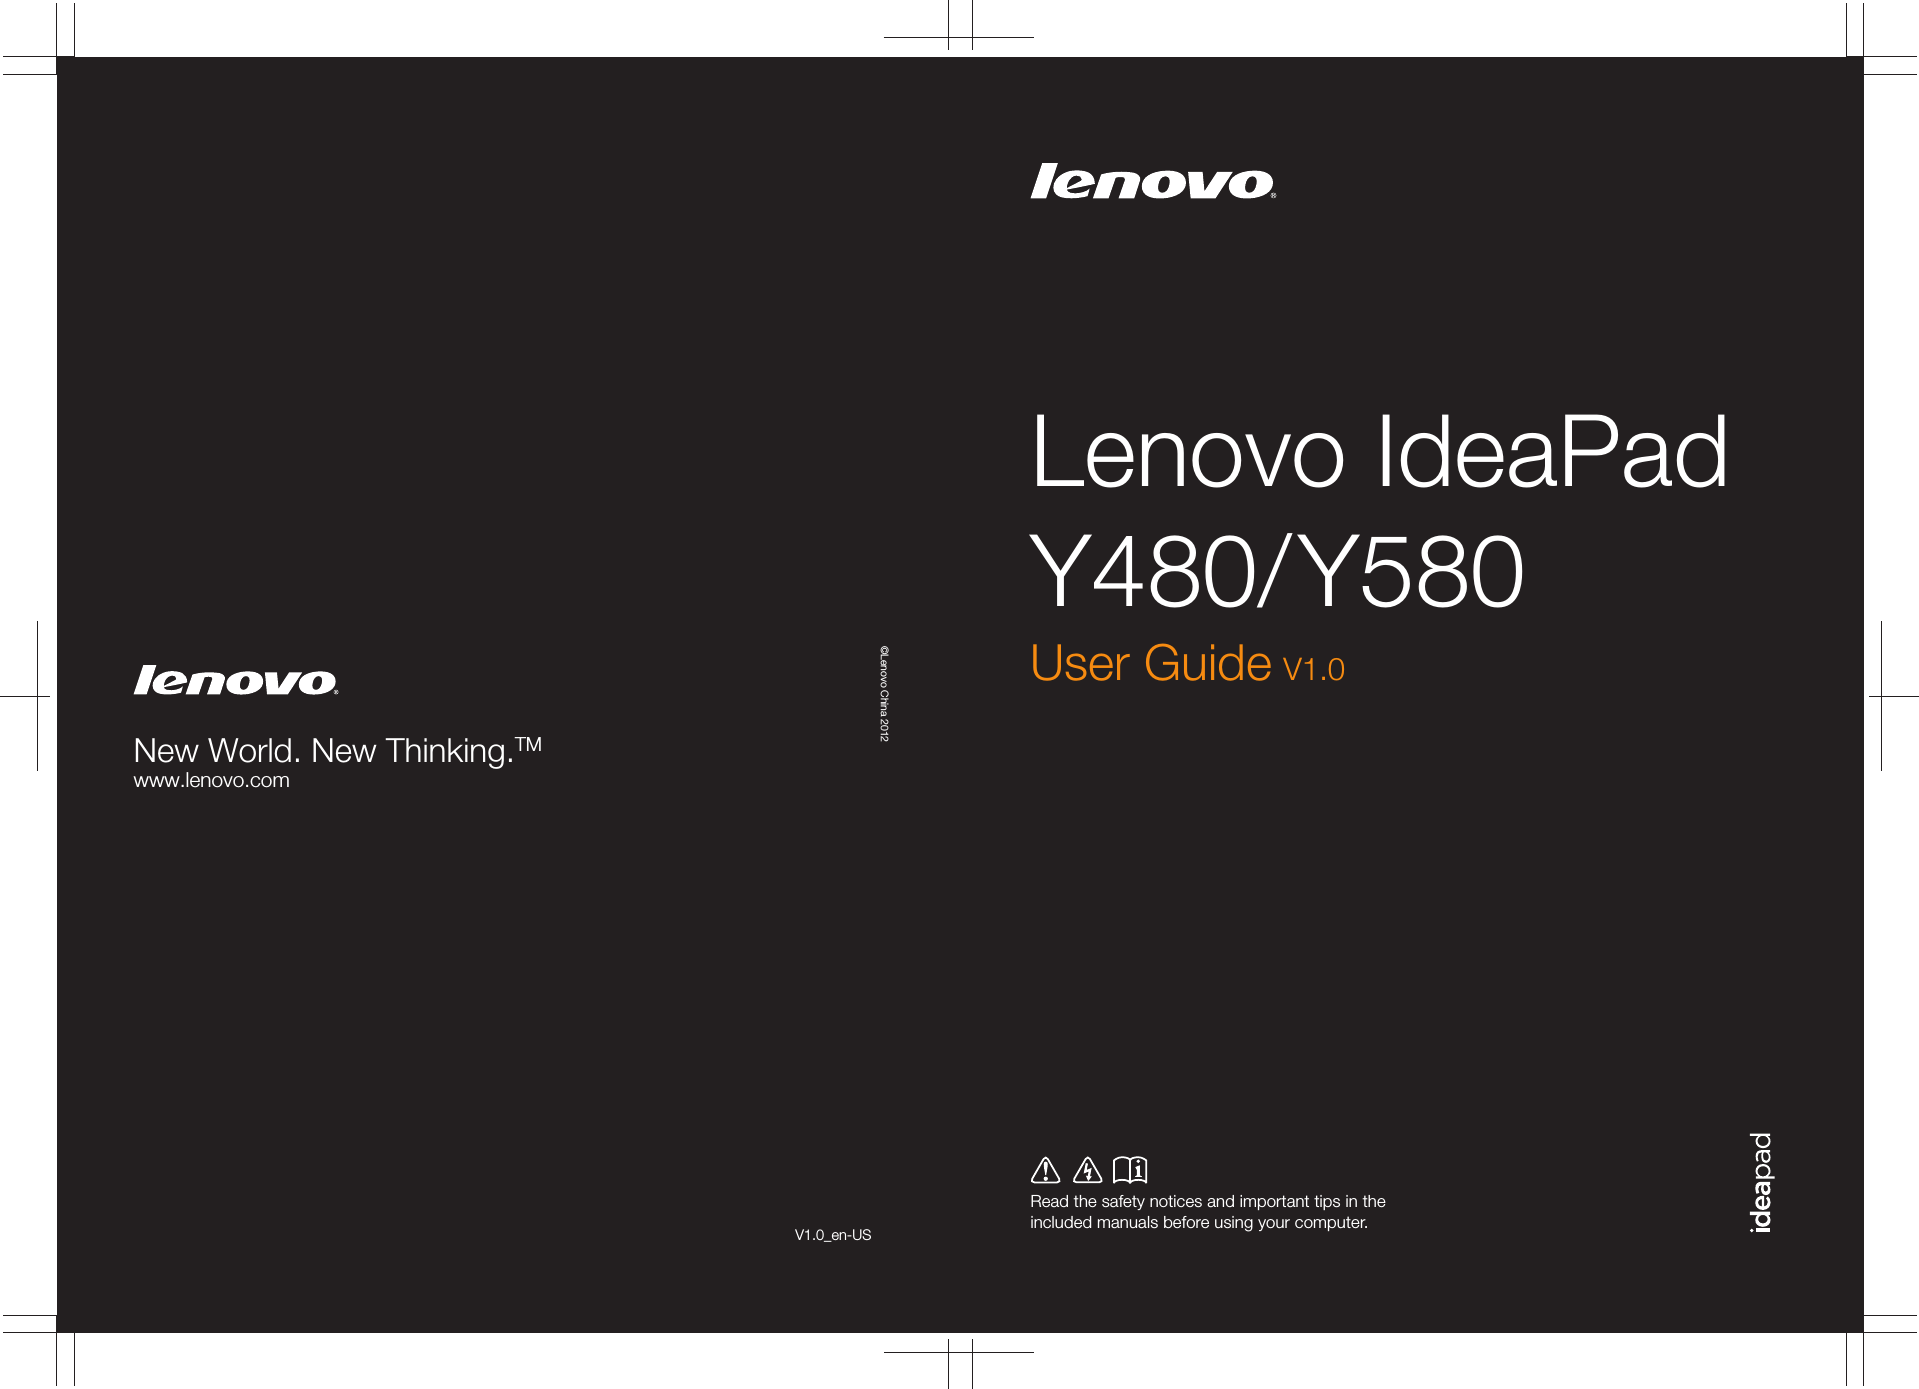 Lenovo IdeaPad Y480/ Y580Read the safety notices and important tips in the included manuals before using your computer.©Lenovo China 2012New World. New Thinking.TMwww.lenovo.comUser Guide V1.0V1.0_en-US